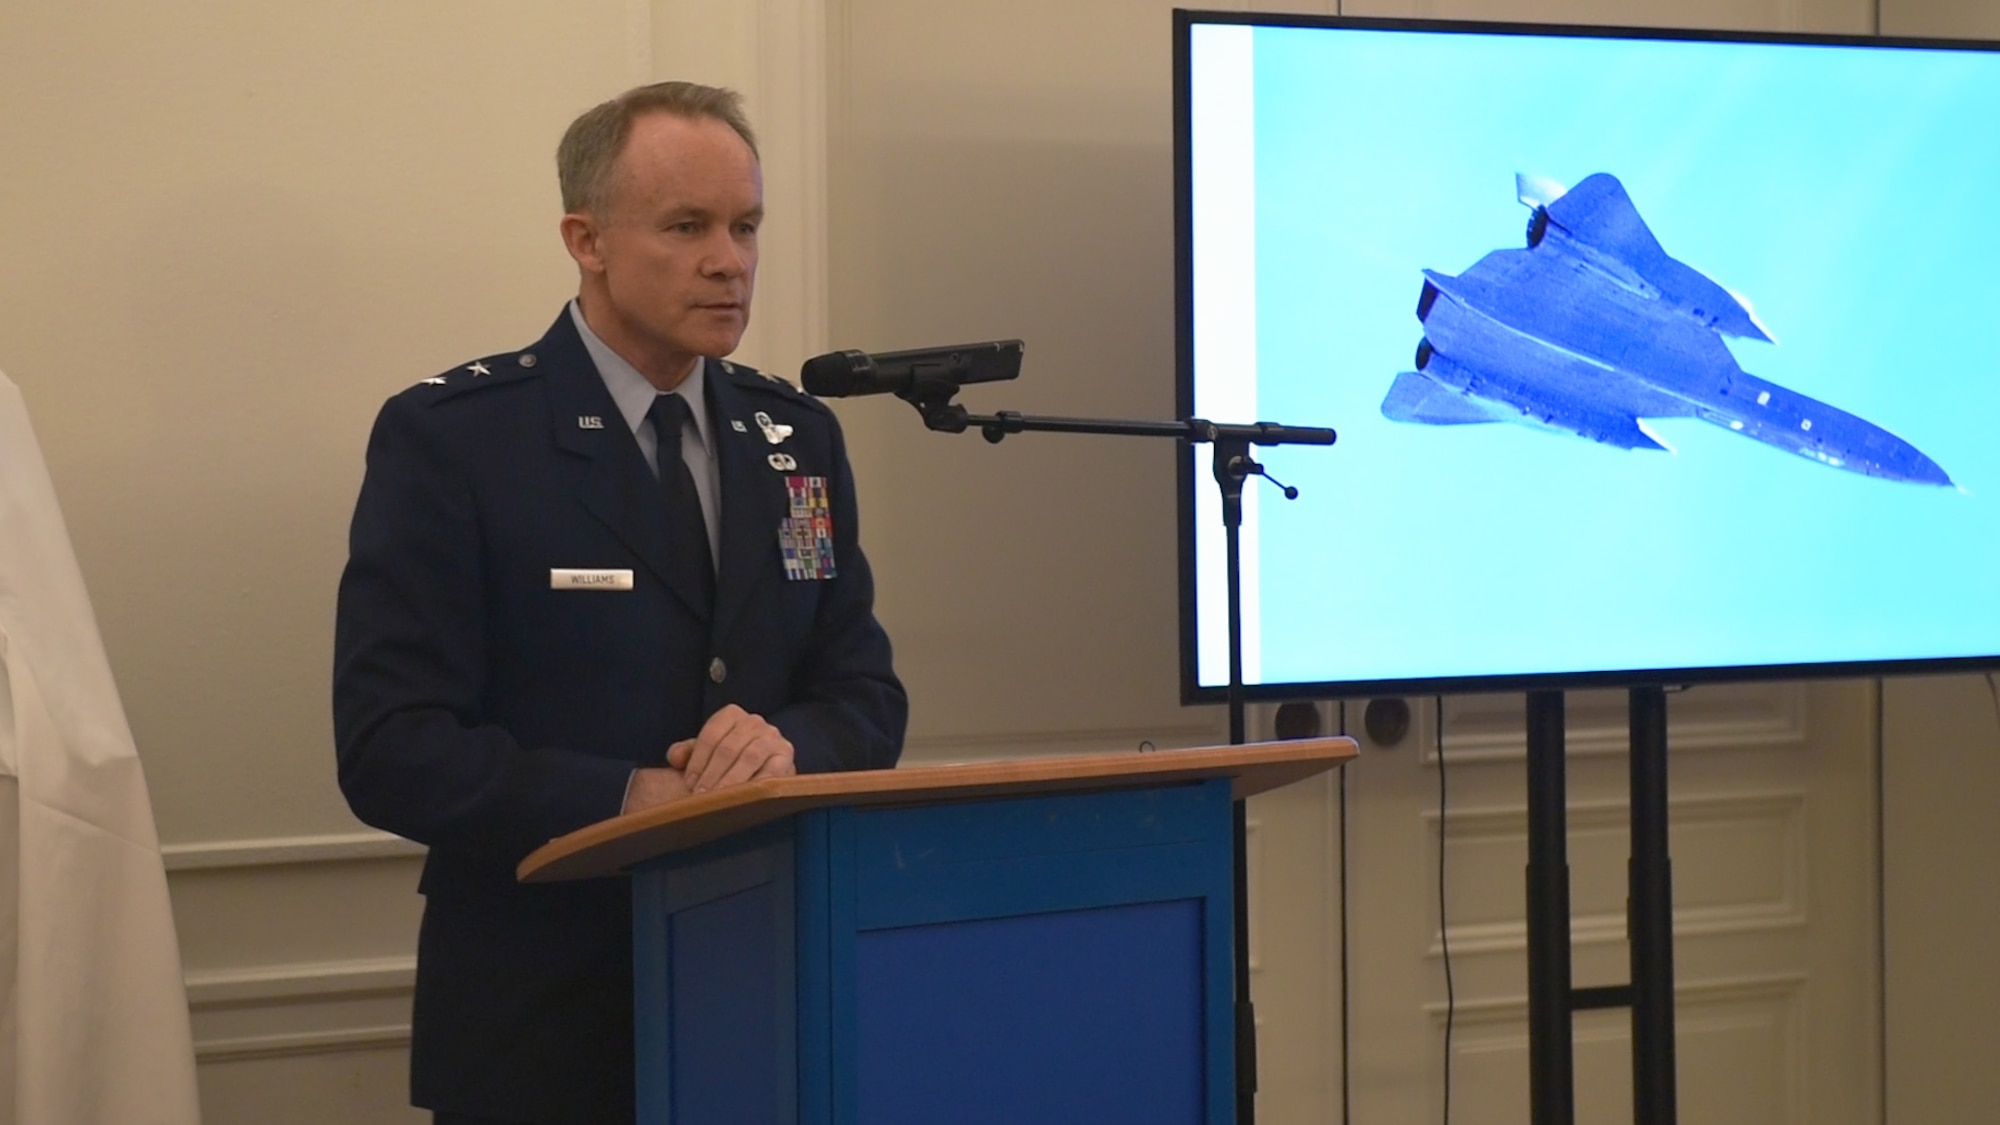 U.S. Air Force Maj. Gen. John Williams, Mobilization Assistant to the commander, U.S. Air Forces in Europe and Africa, talks about the Swedish pilots who are being awarded the U.S. Air Medal in Stockholm, Sweden, Nov. 28, 2018. Gen. Williams thanked the four Swedish Airmen who risked their lives to save an SR-71 and the aircrew in 1987. (U.S. Air Force Photo by Senior Airman Kelly O'Connor)